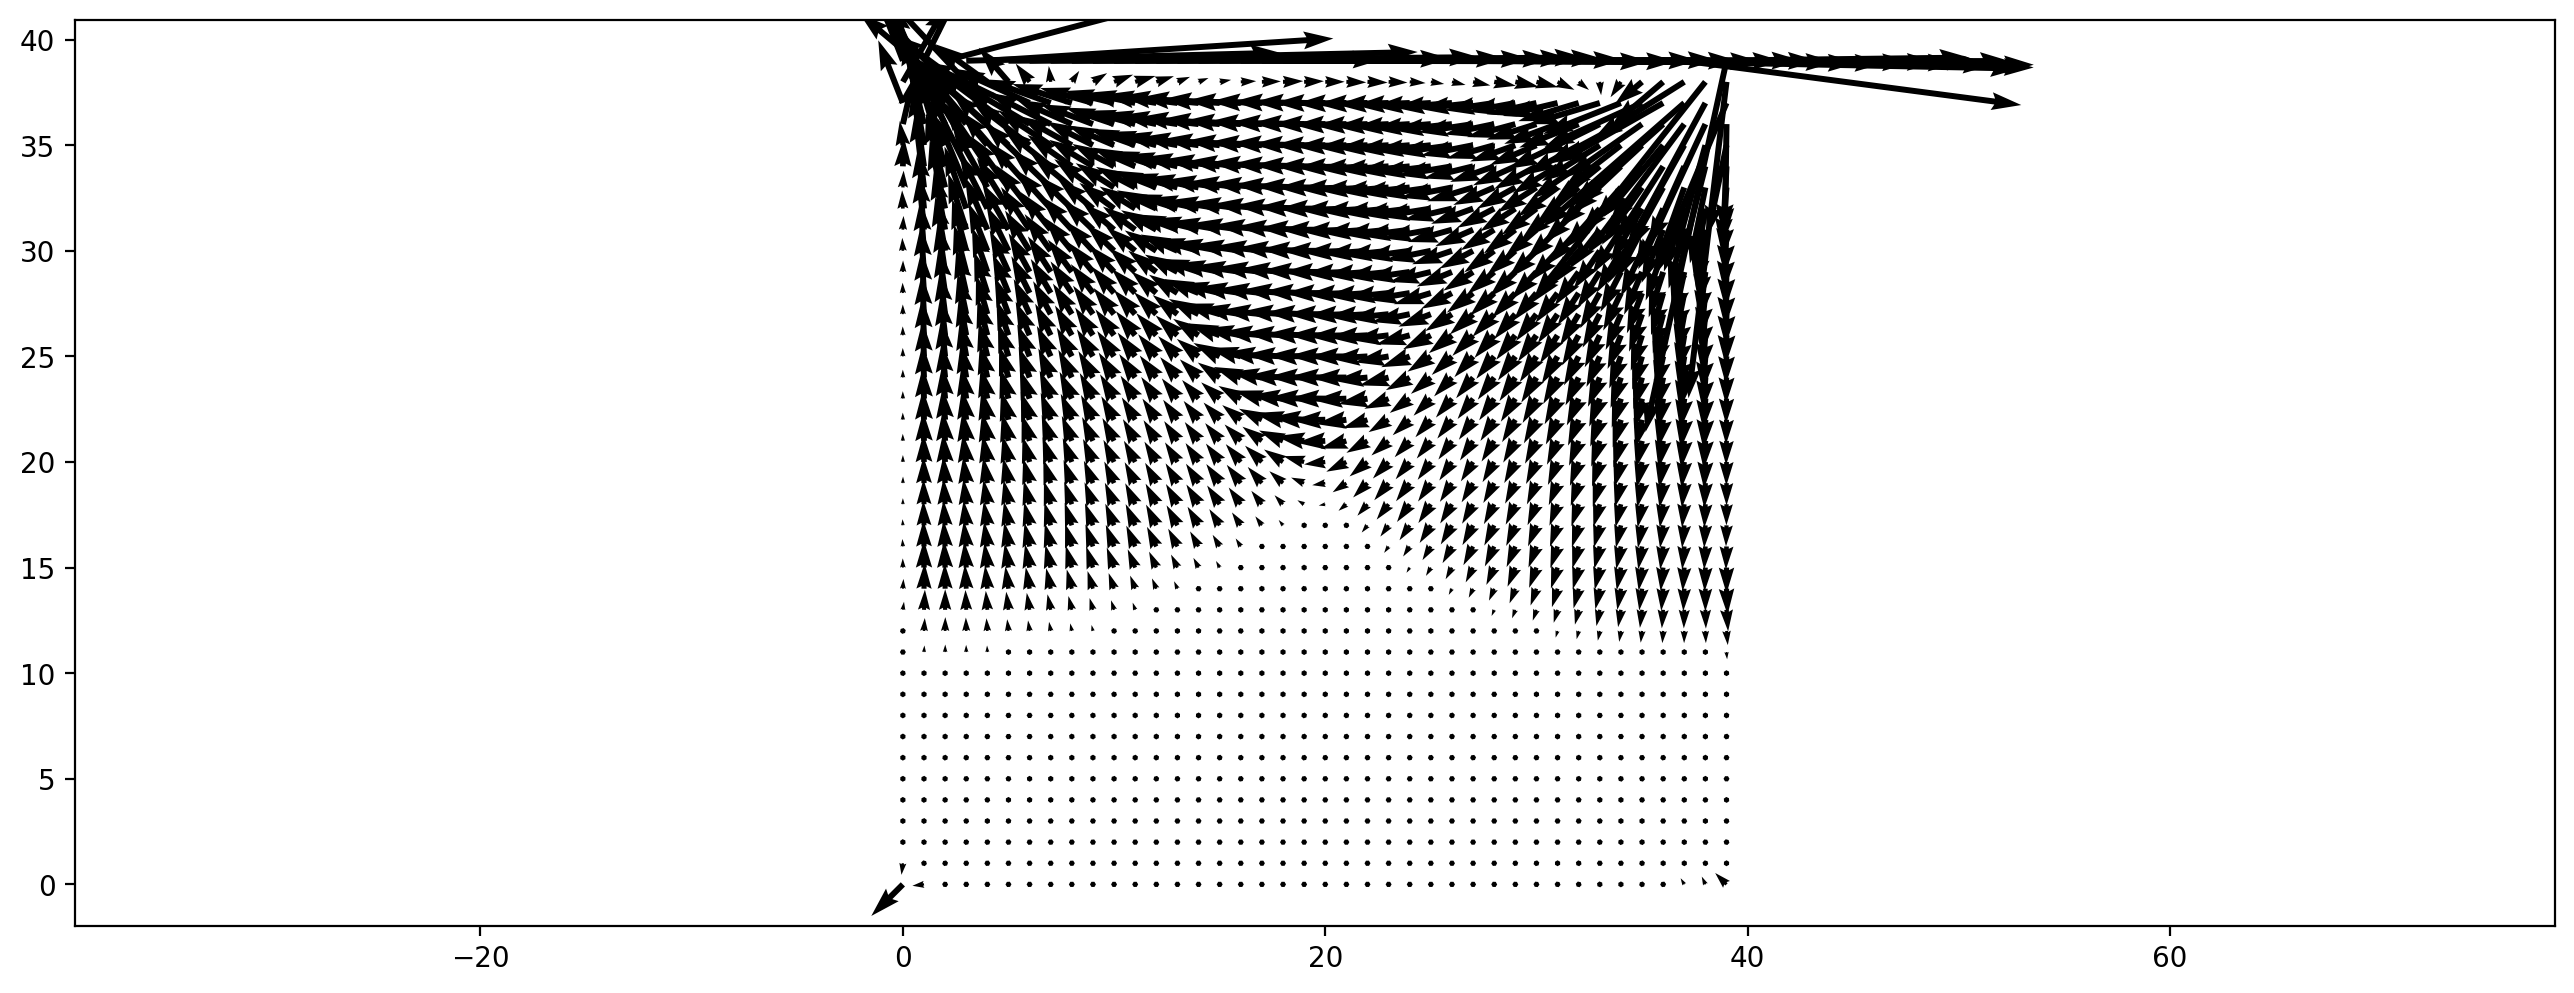 ../_images/notebooks_demo_thermalized_lbm_14_0.png